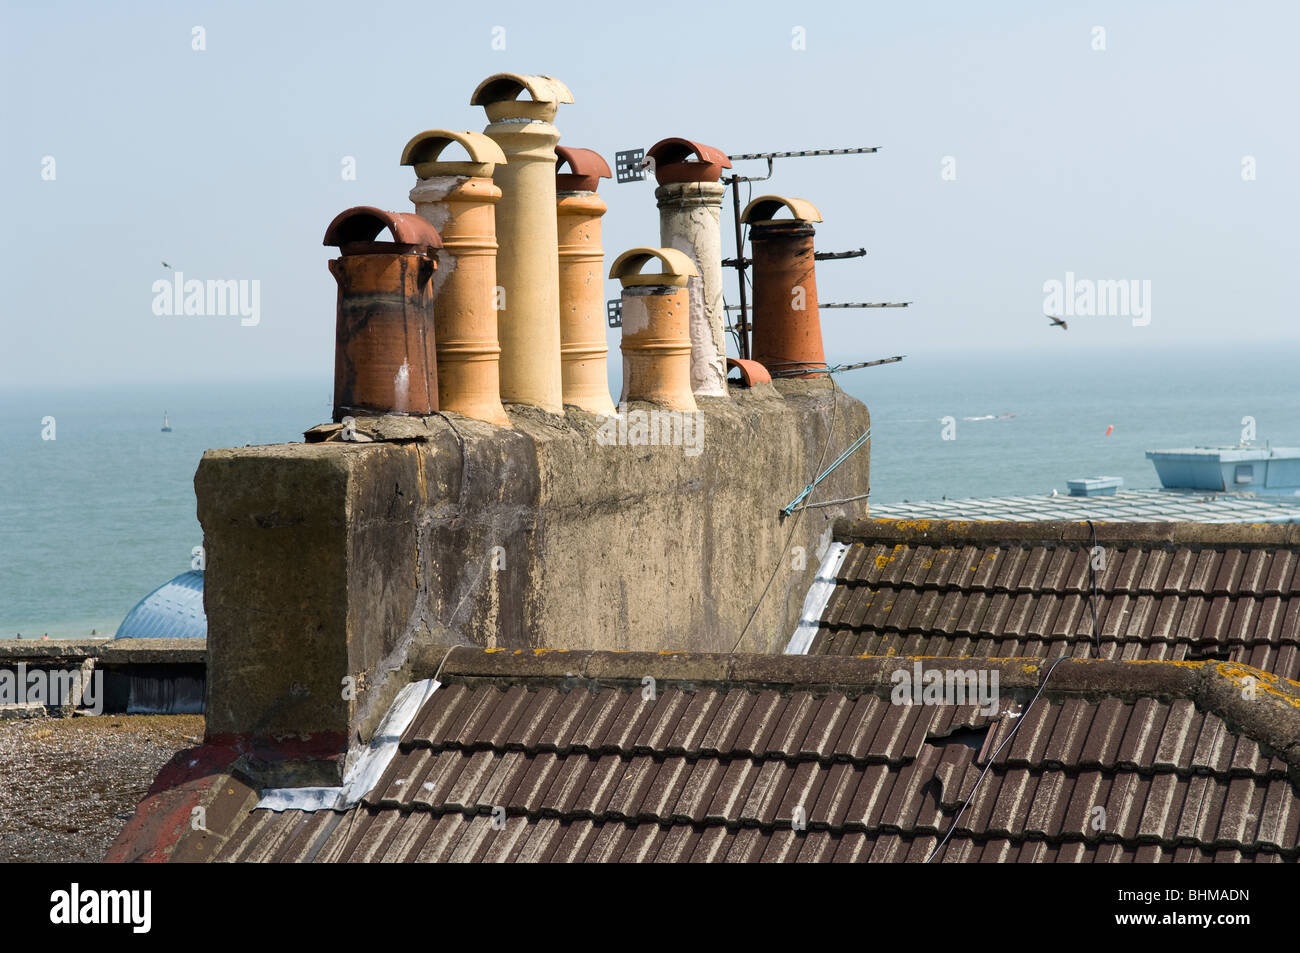 Roof tops showing concrete interlocking tiles including broken tiles. Chimney stacks and pots and television aerials can be seen Stock Photo